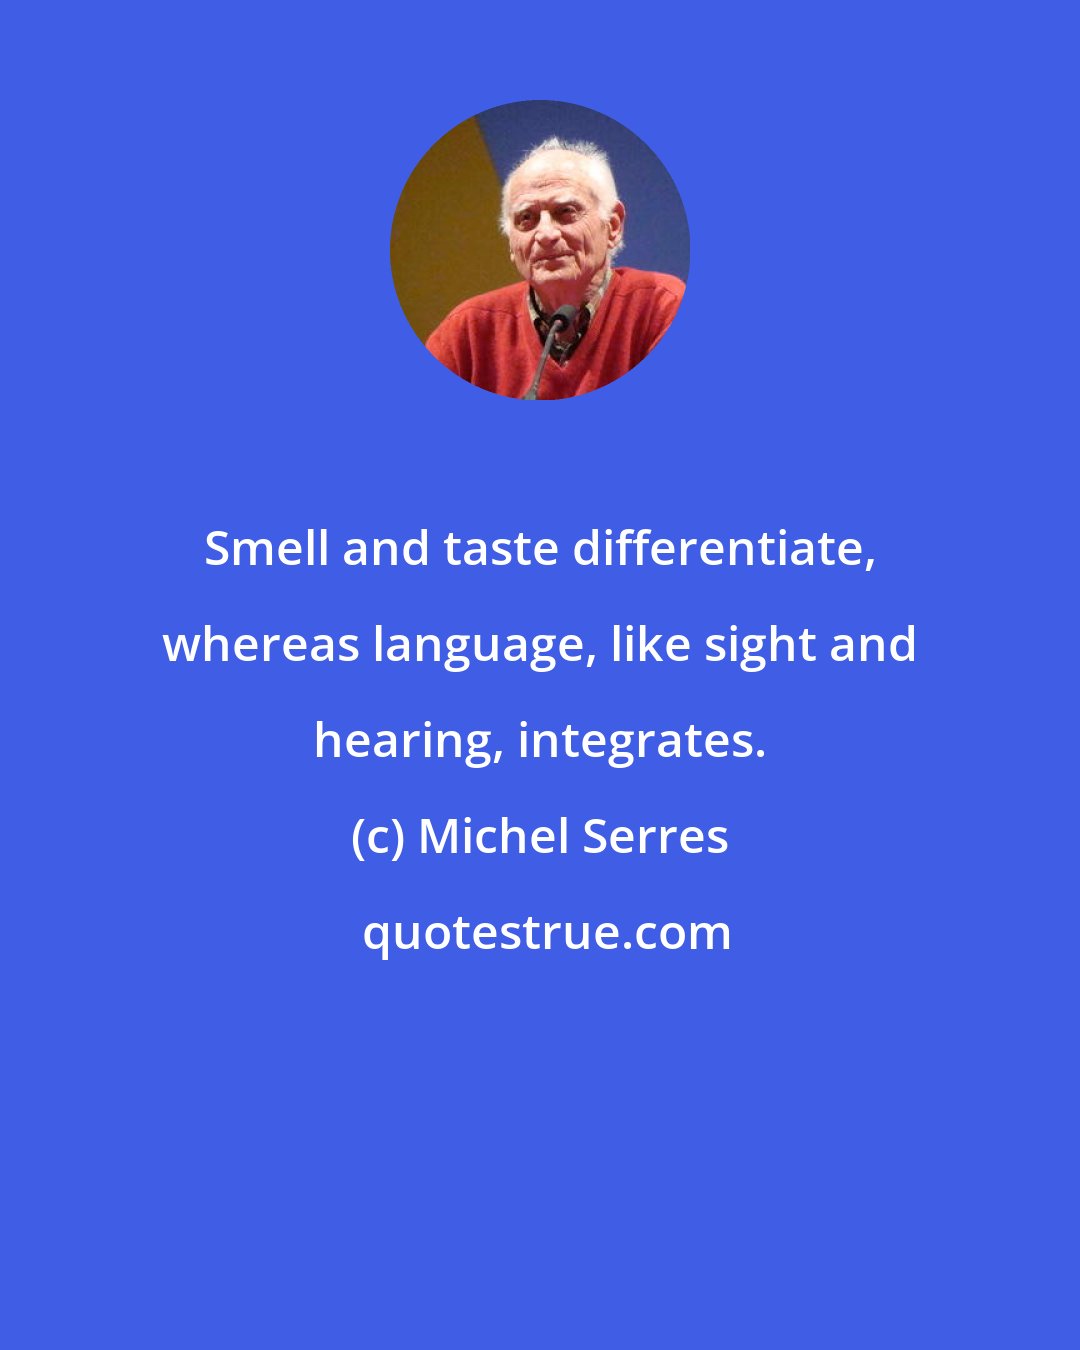 Michel Serres: Smell and taste differentiate, whereas language, like sight and hearing, integrates.